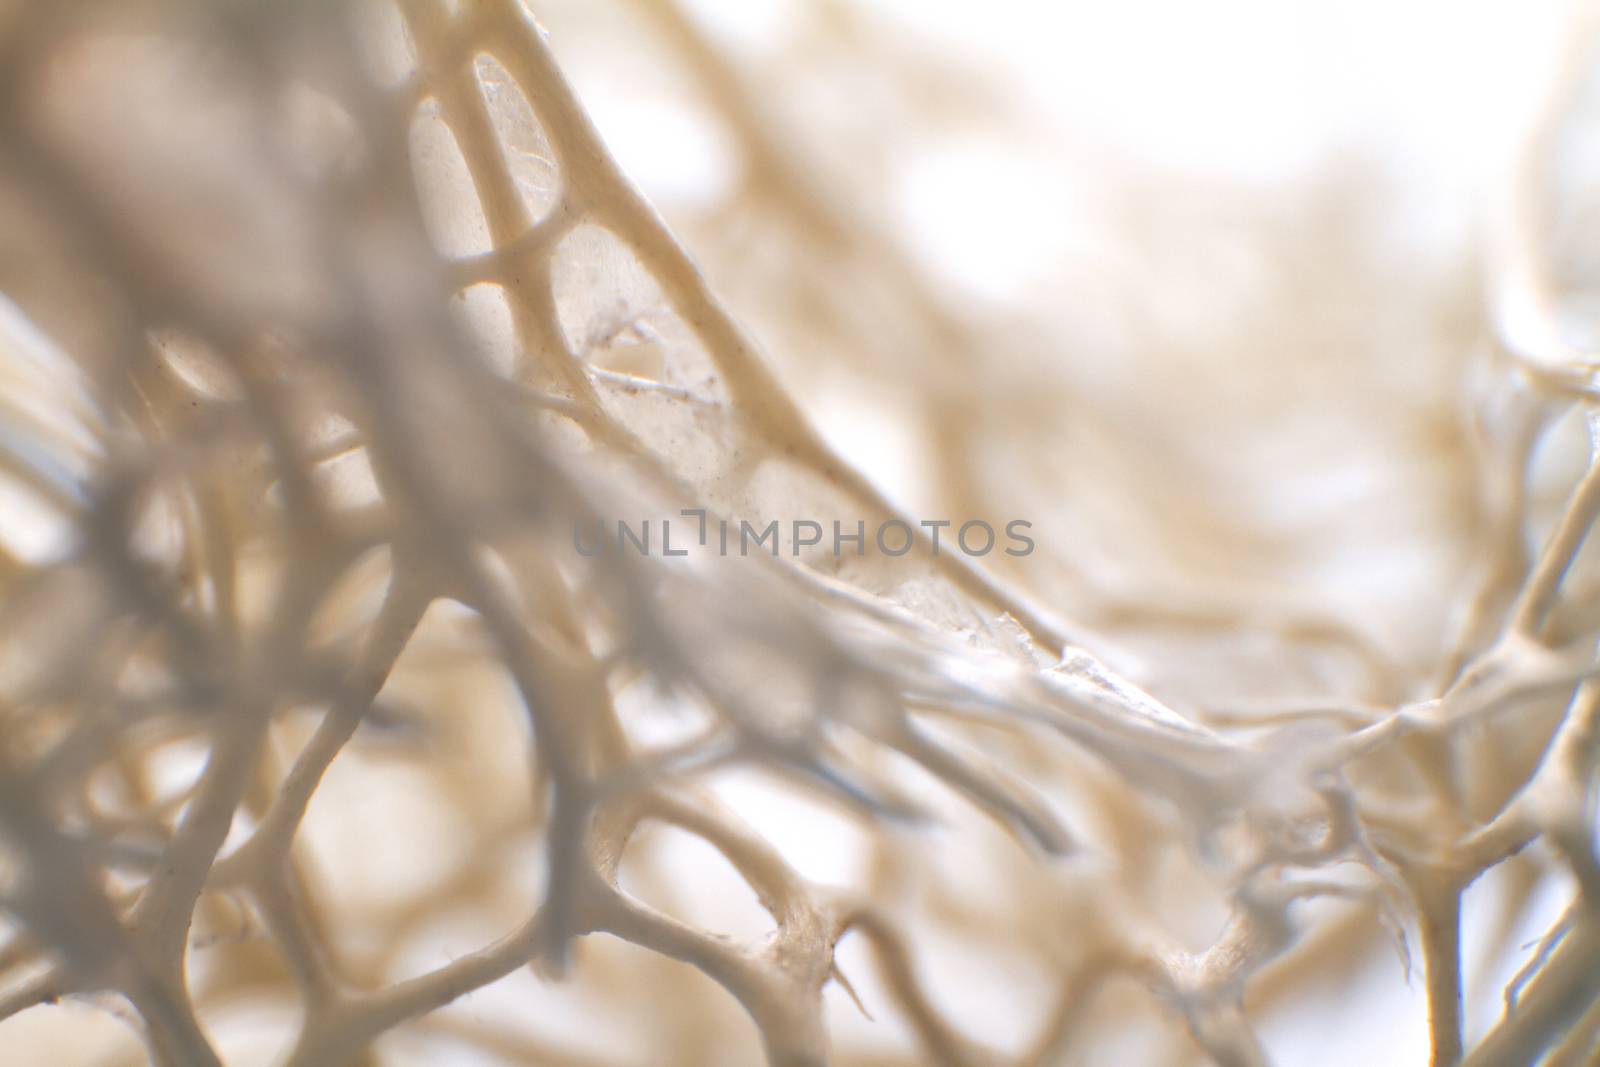 Artistic colored background creation from macro photo shot of dried sea sponge by robbyfontanesi